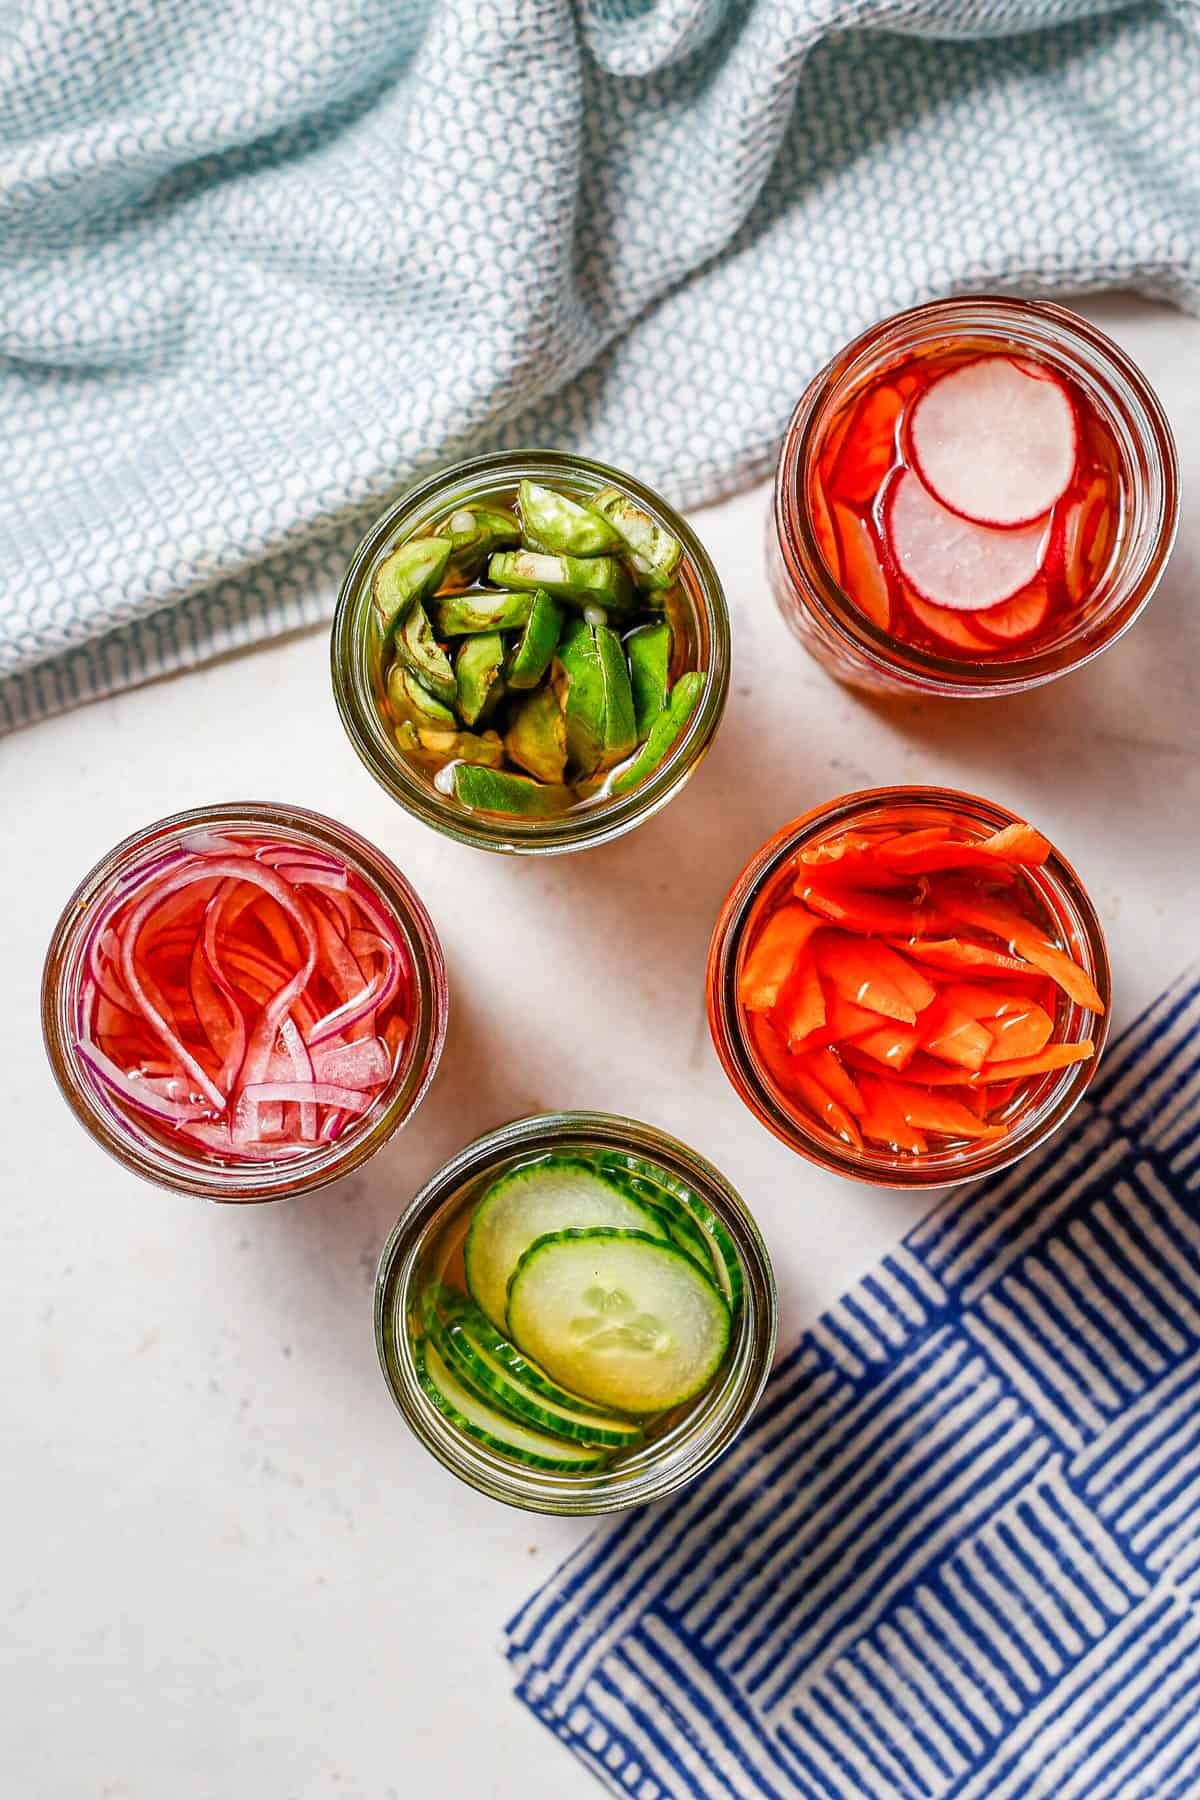 Overhead view of five small glass jars with different pickled vegetables in each one.